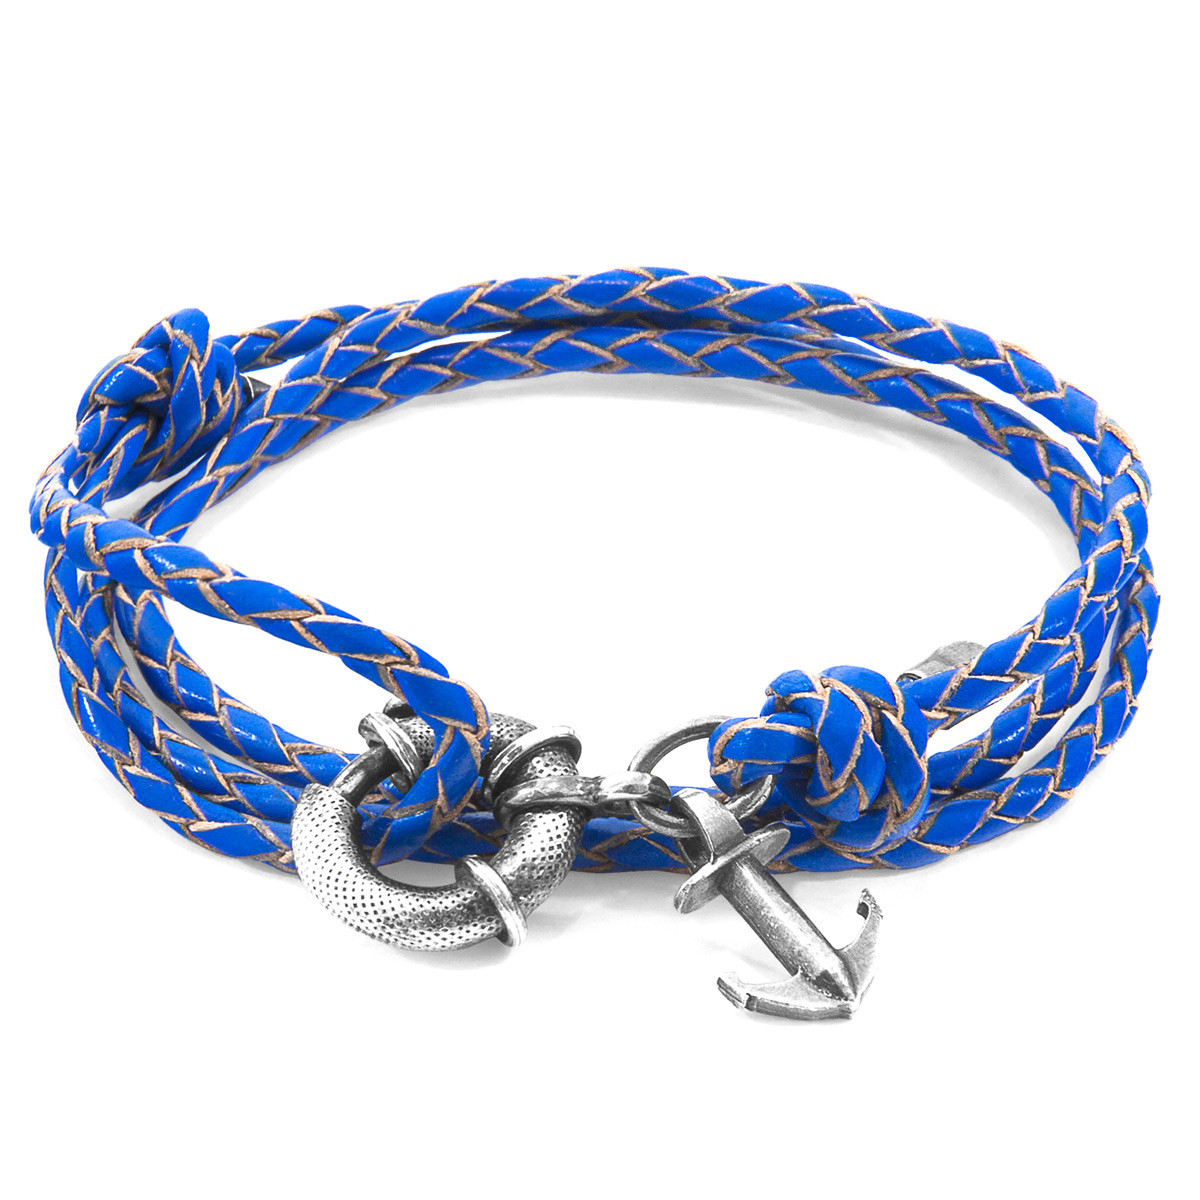 Anchor & Crew Royal Blue Clyde Anchor Silver and Braided Leather Bracelet